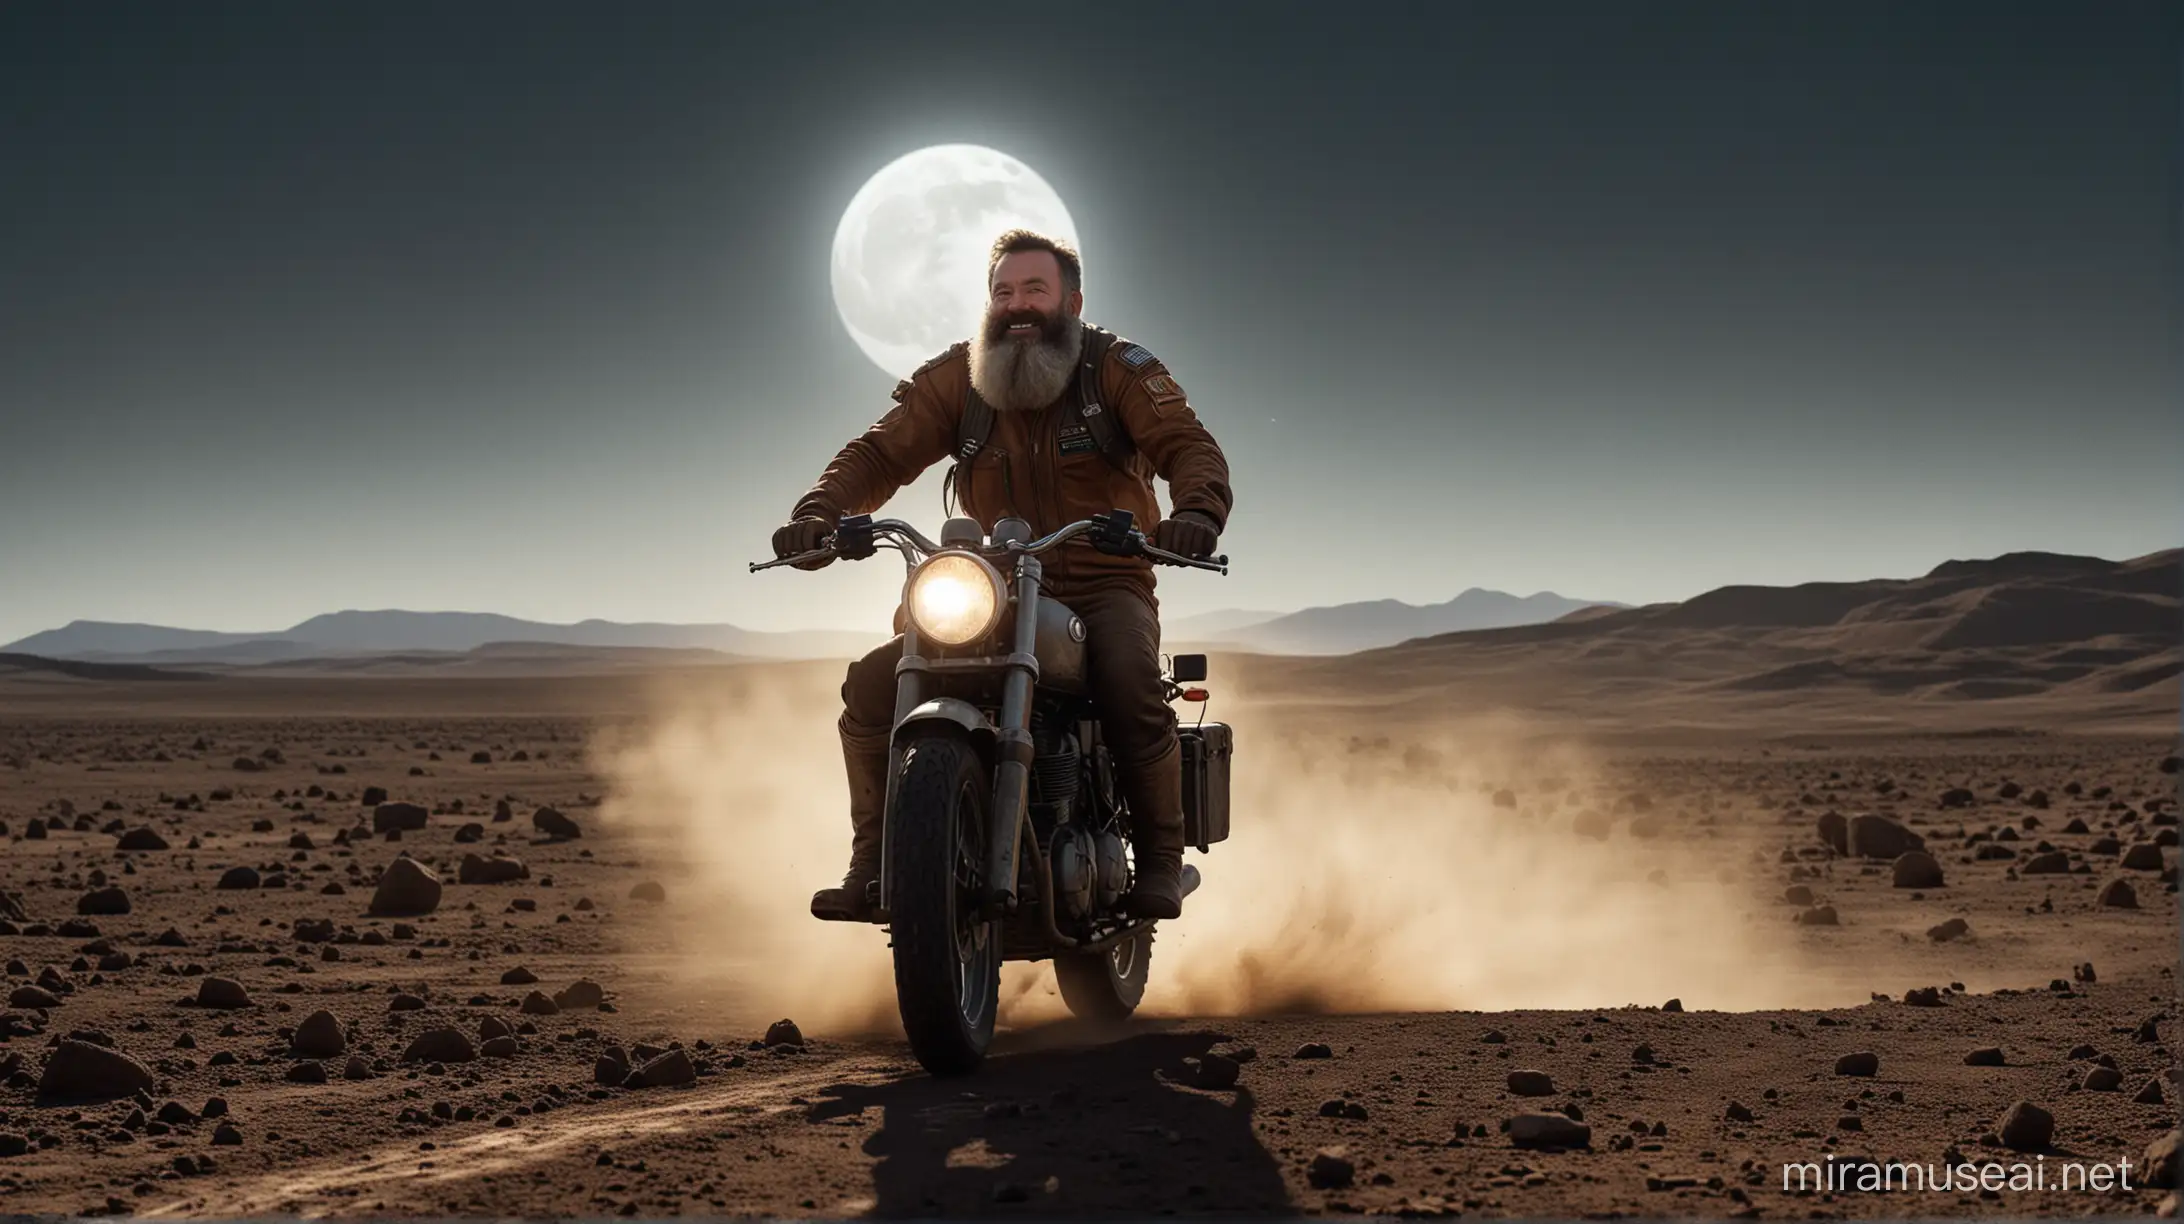 magine a scene straight out of a lunar odyssey, featuring a middle-aged man with a full beard, exuding sheer joy while speeding across the Moon's surface on a motorcycle. This unique portrayal lacks any protective gear, highlighting the man's untamed spirit. The perspective is intentionally low, close to the lunar soil, emphasizing the sense of speed and freedom. The motorcycle, a beacon of human audacity, cuts through the silent, empty expanse under a celestial glow, casting long shadows and creating a deep, immersive field that invites the viewer into this boundless adventure.